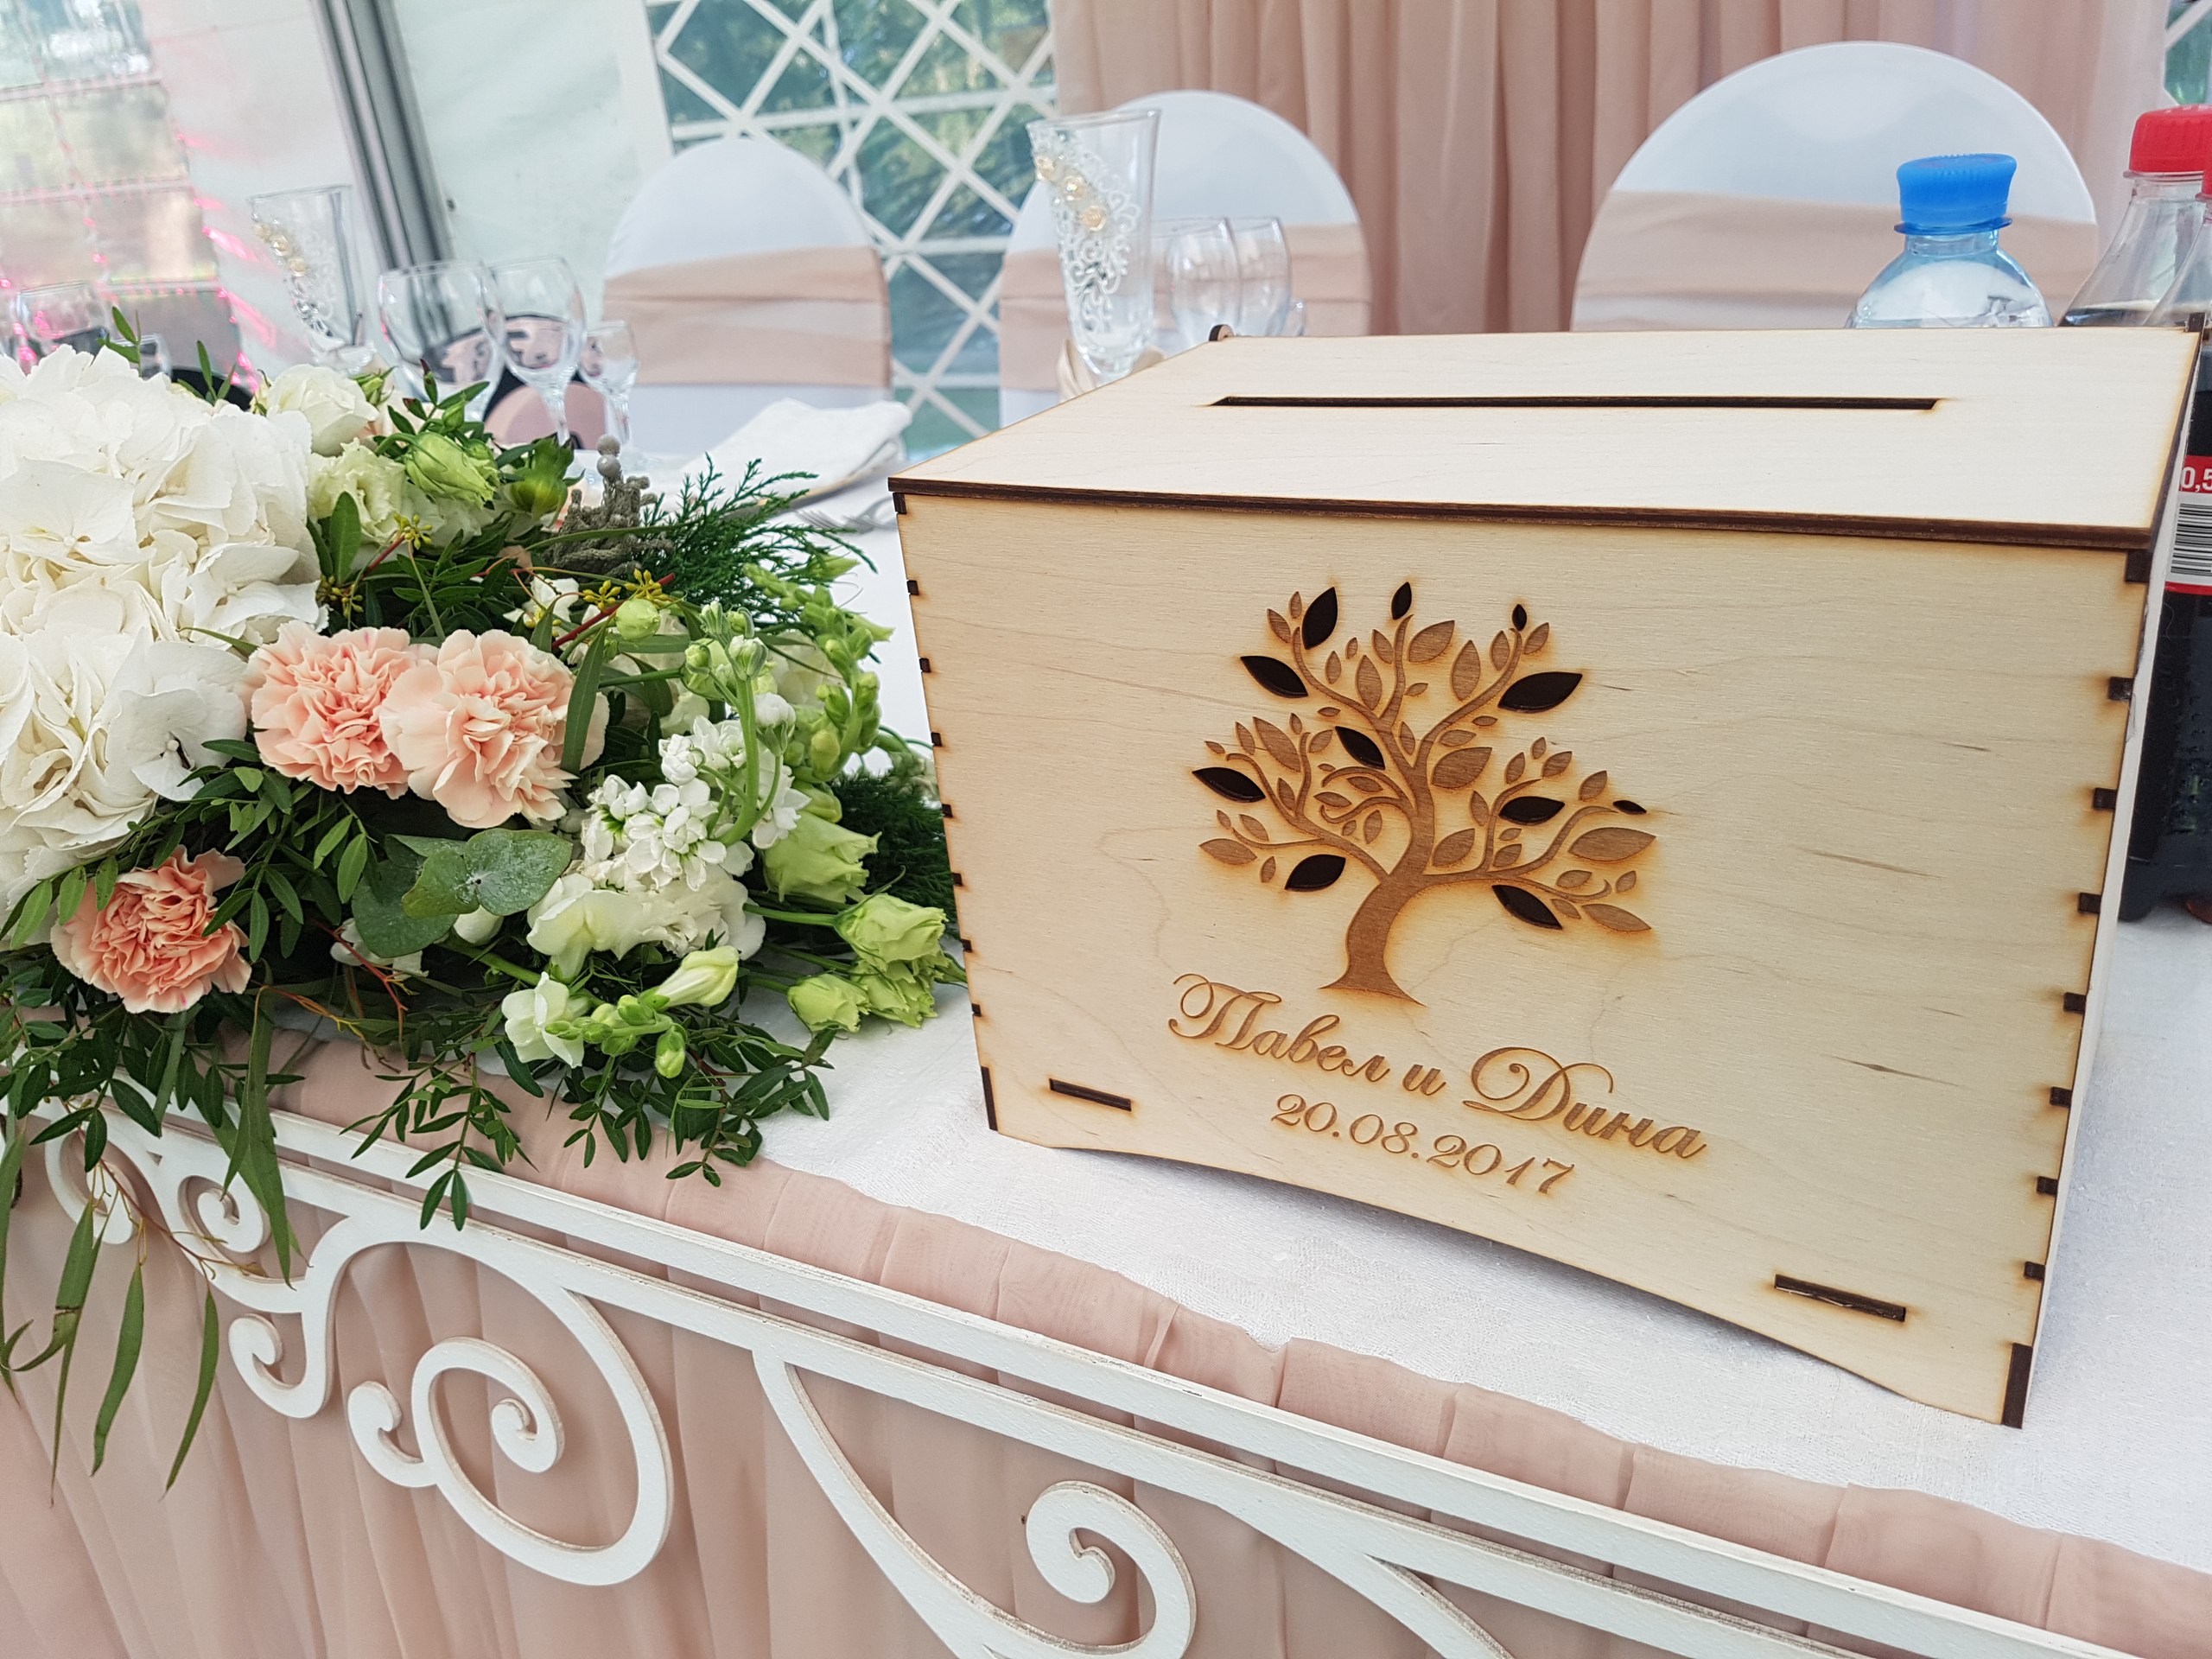 Wooden Wedding Boxes With Slot on Top Money Card Storage Free Vector